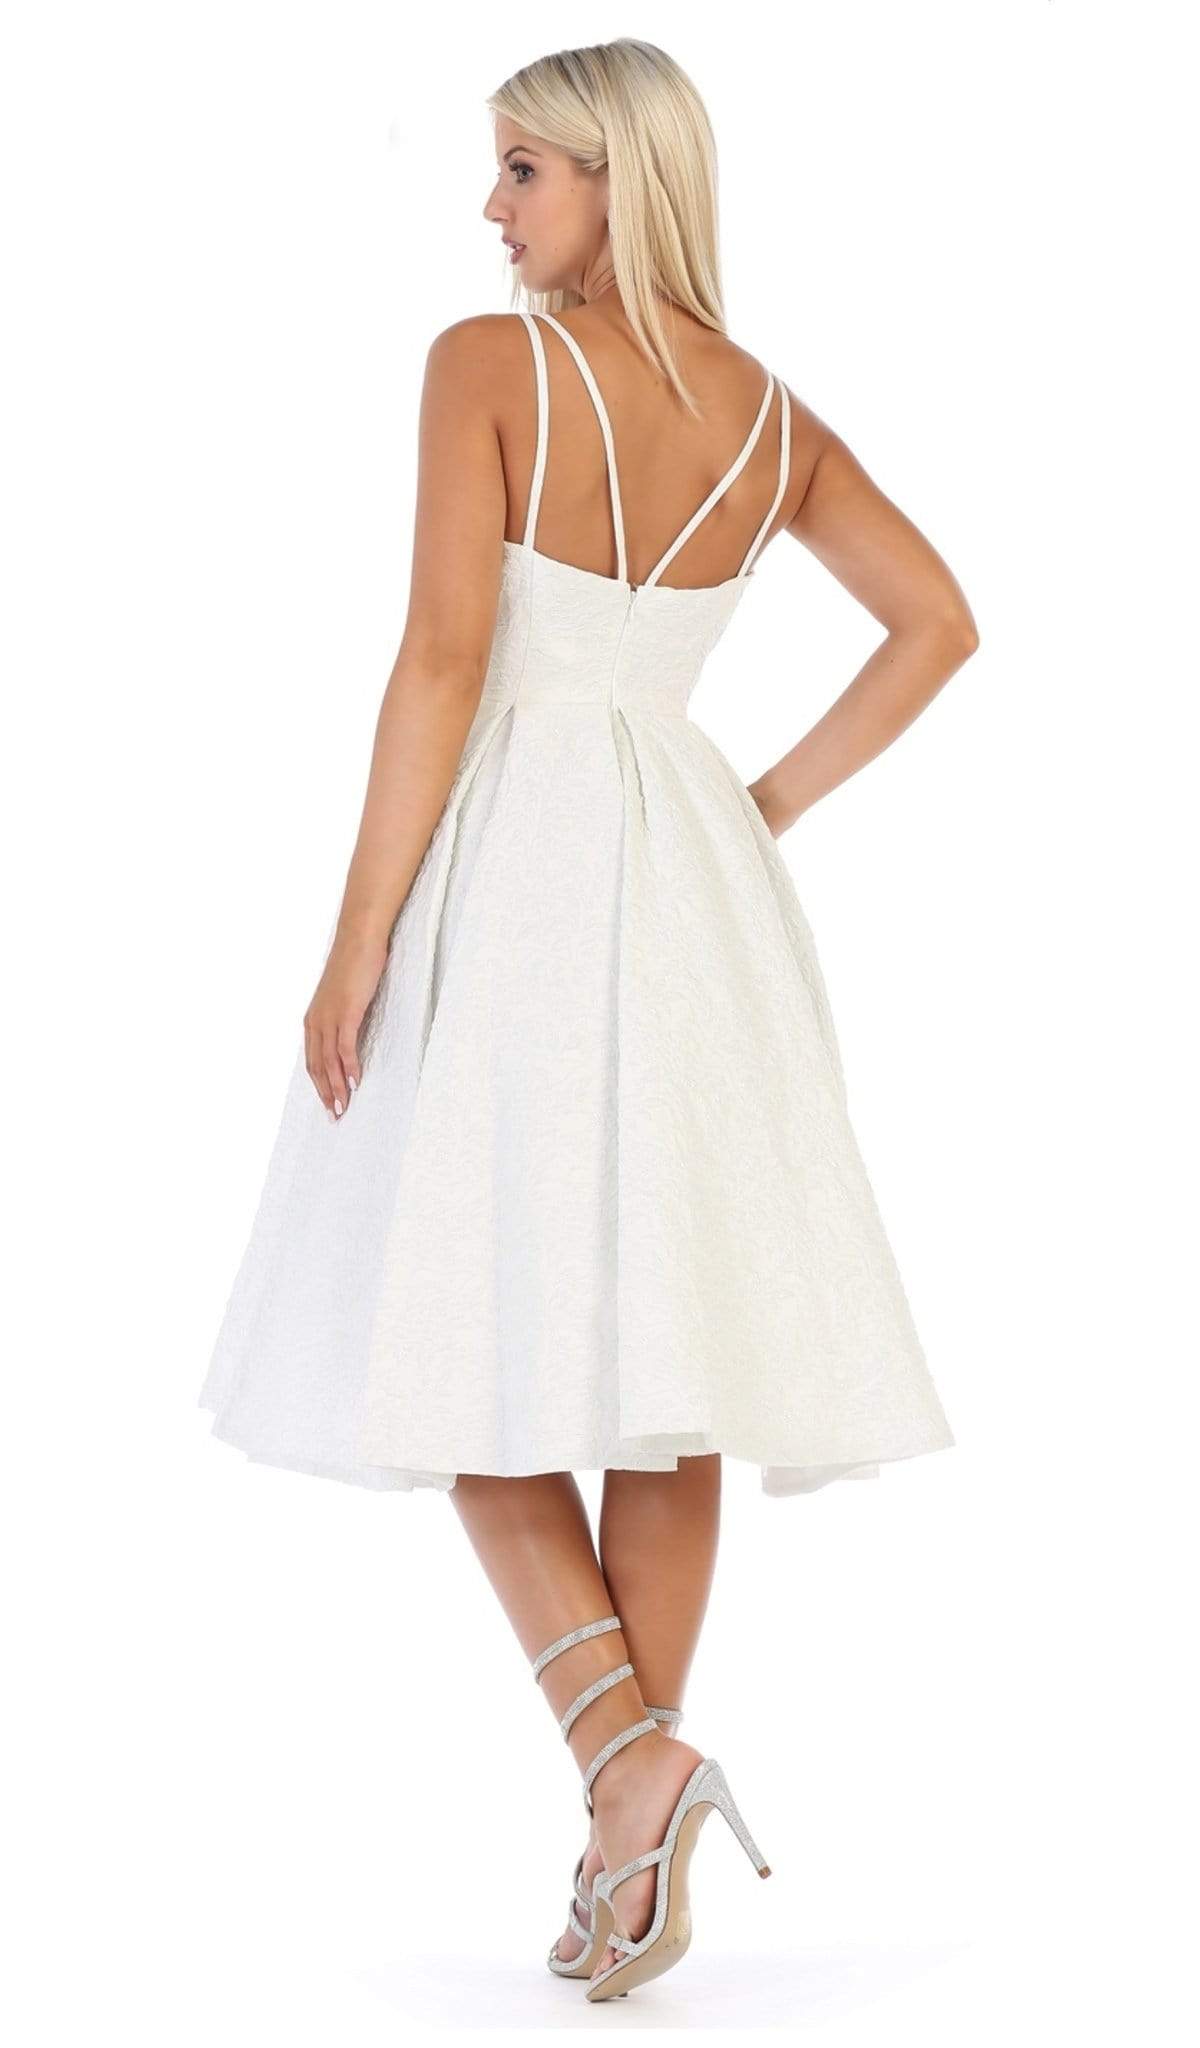 May Queen - RQ7699 Plunging Sweetheart A-Line Cocktail Dress Cocktail Dresses